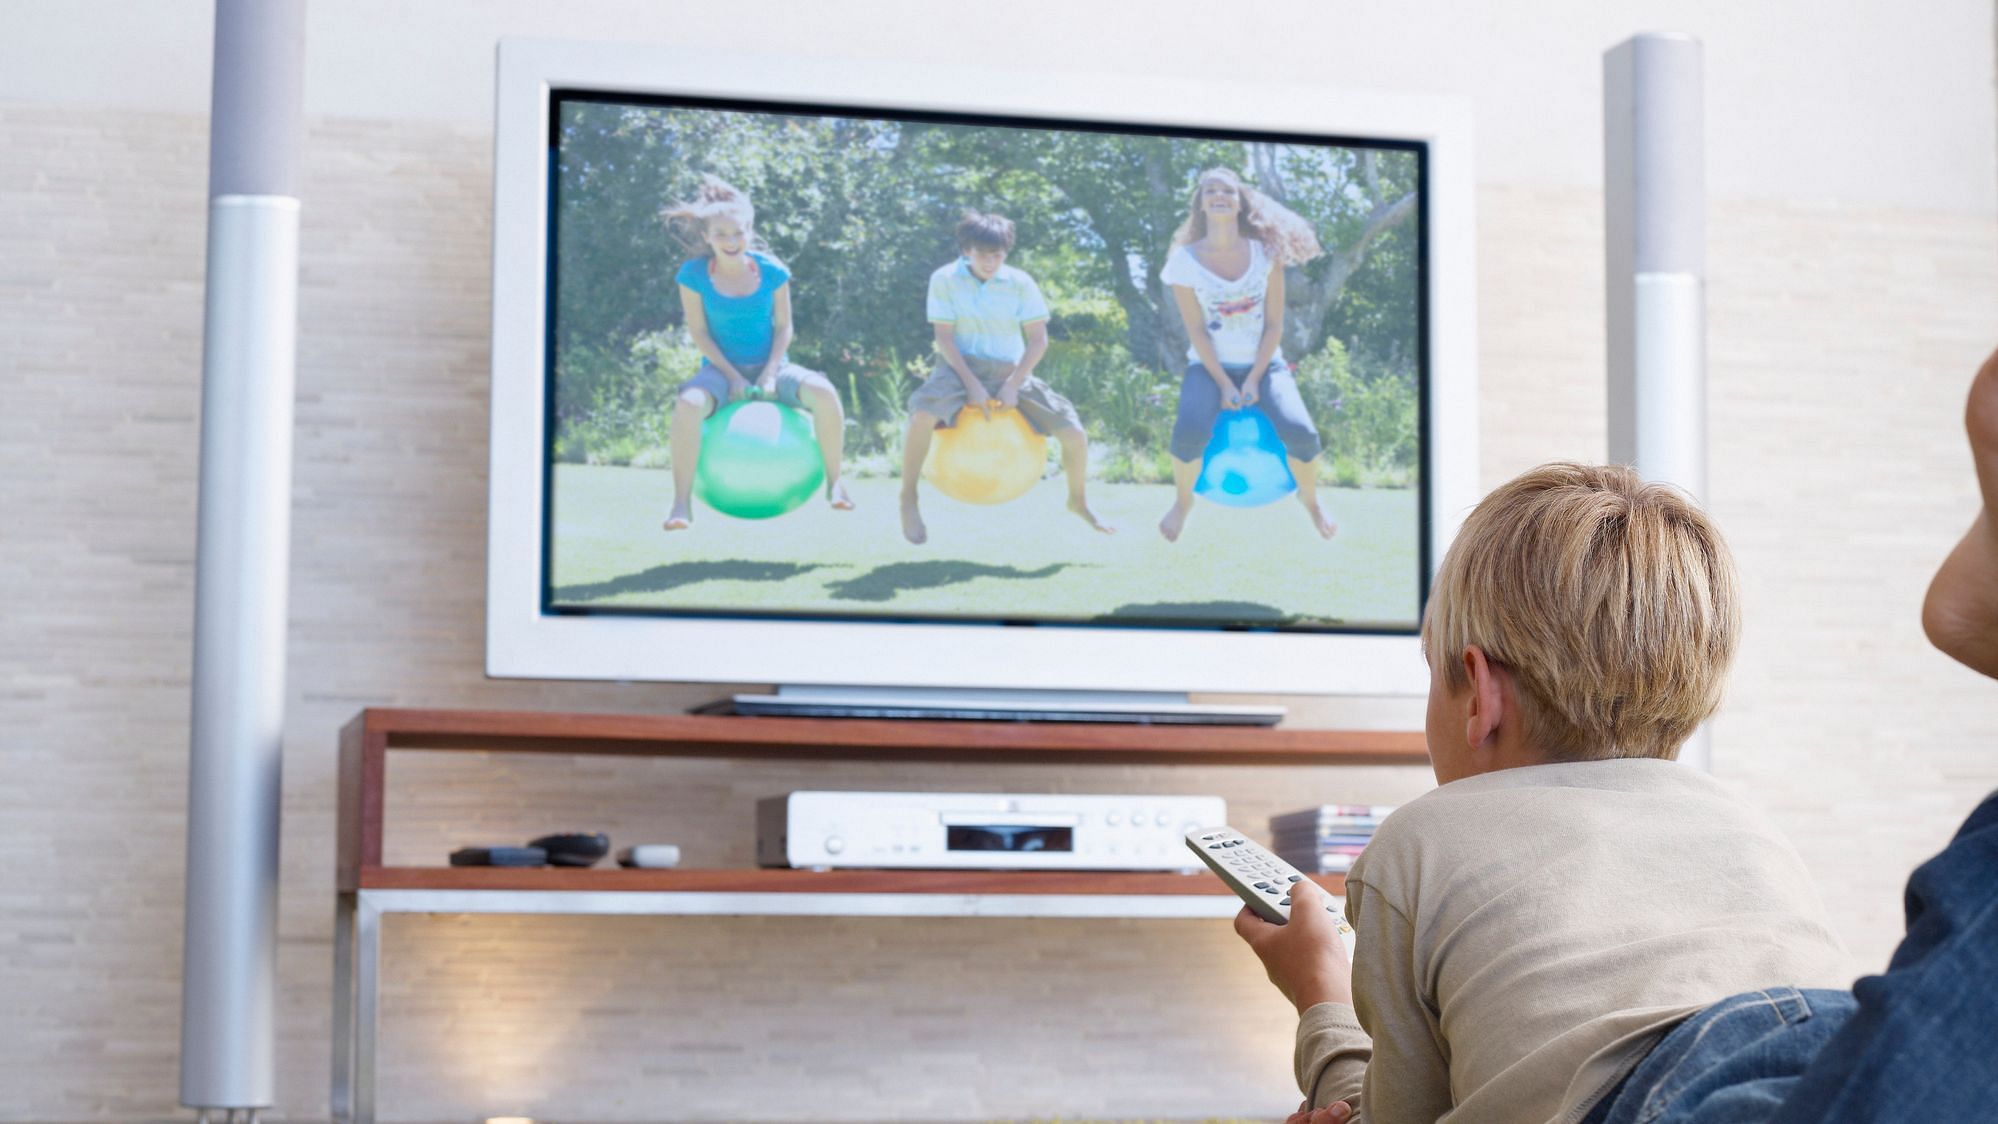 Children constantly sitting in front of the TV makes them lazy and inactive, according to the research.